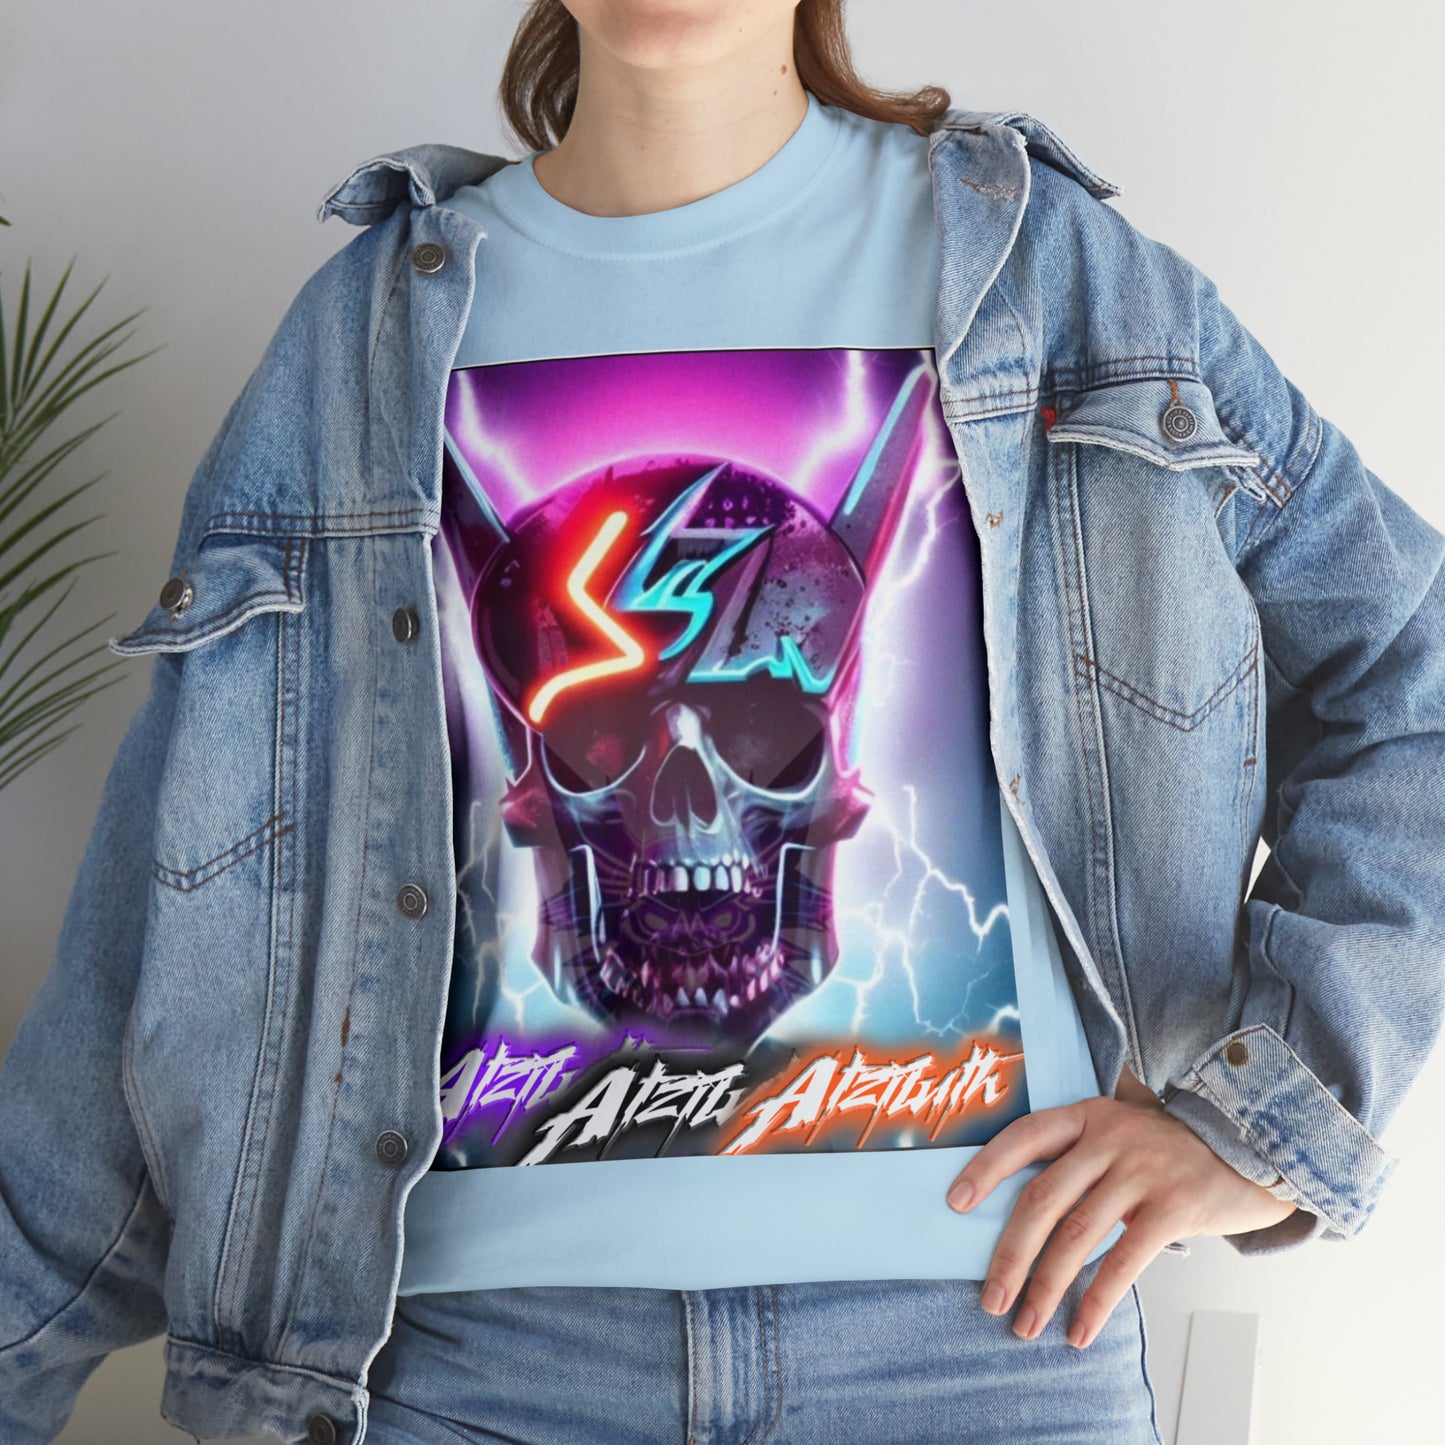 Atzilith Gallery "Lit Skull" T-shirt